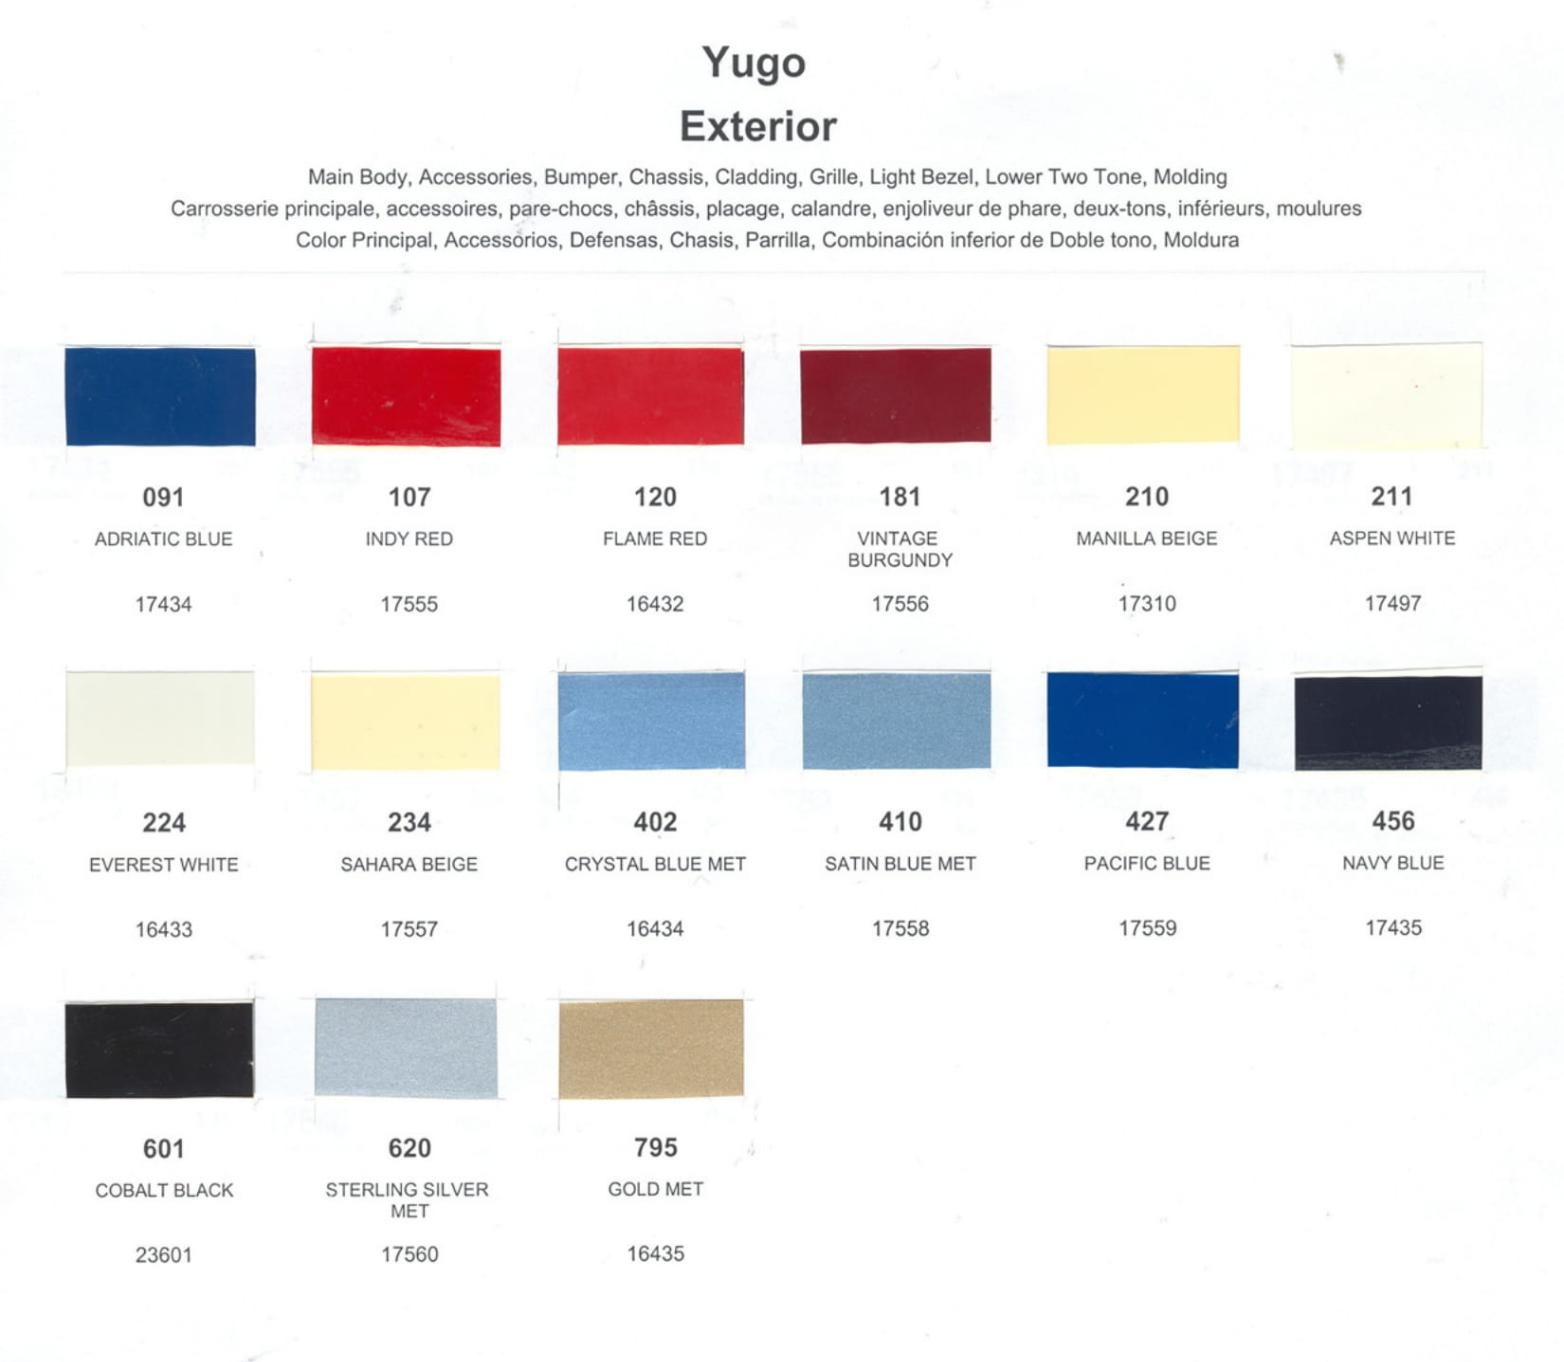 Exterior Colors and their paint codes used on Yugo in 1988